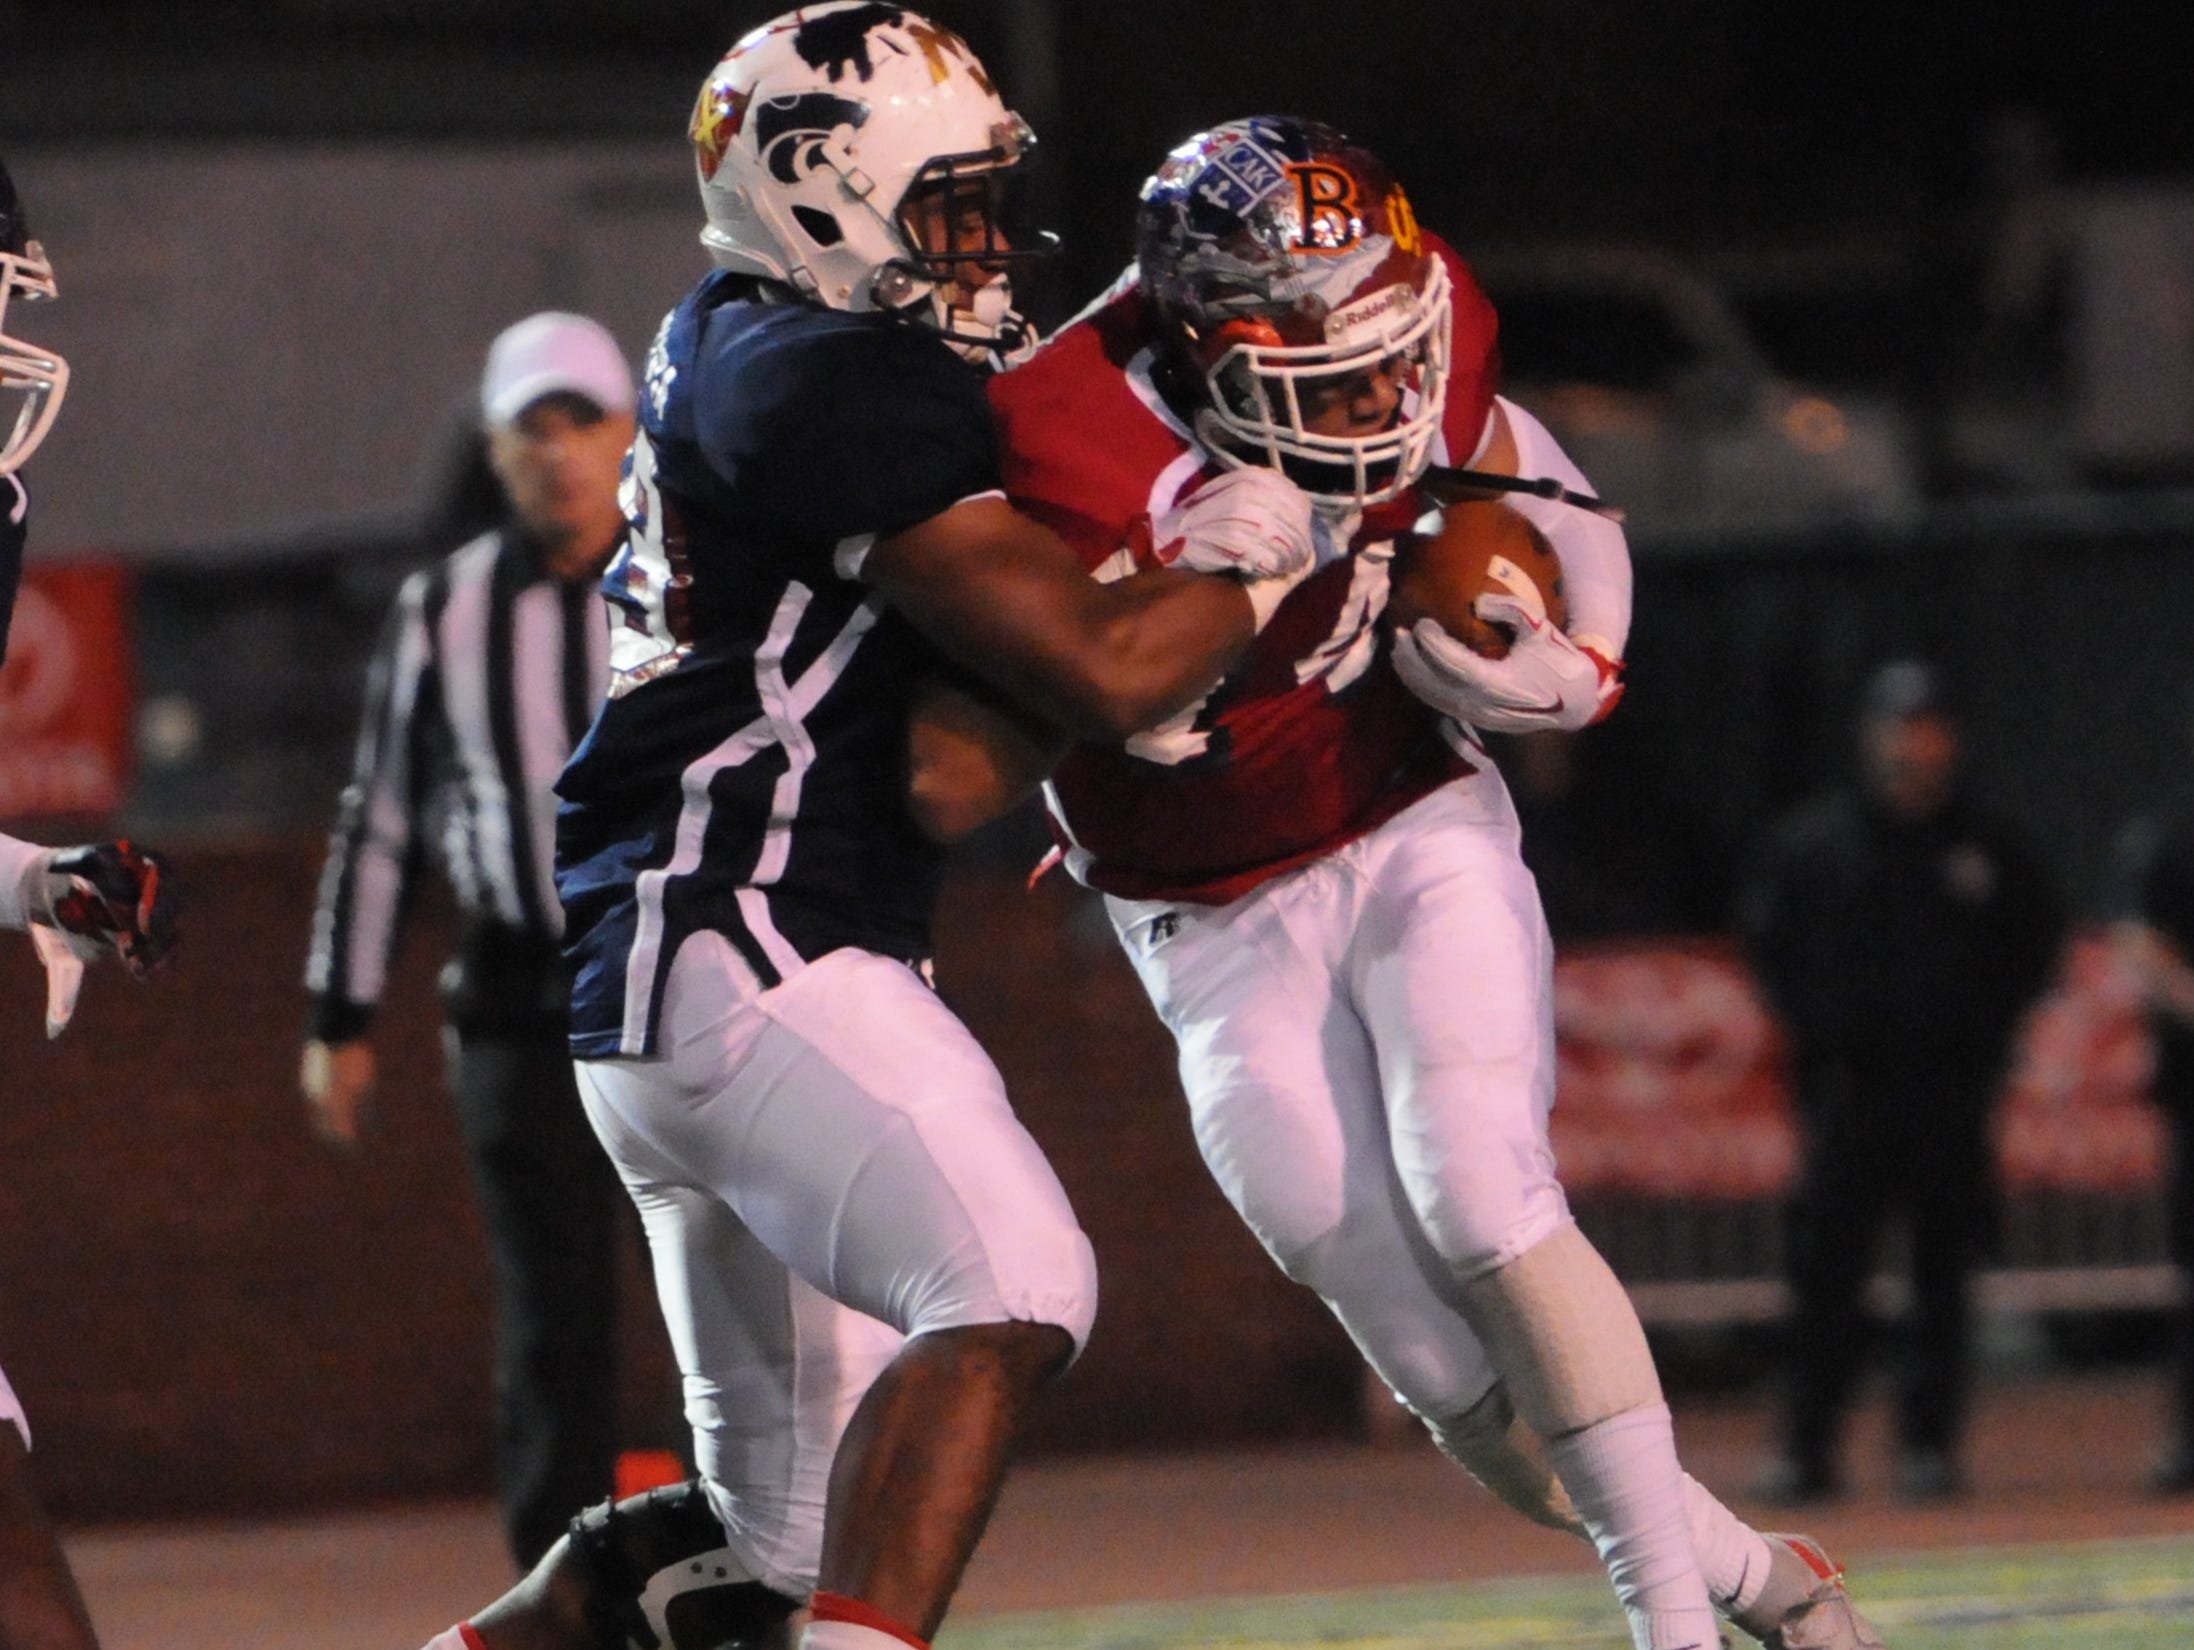 Centennial's Tyrel Dodson tackles East opponent DeAndre Delaney during Friday's East-West All-Star game in Cookeville.